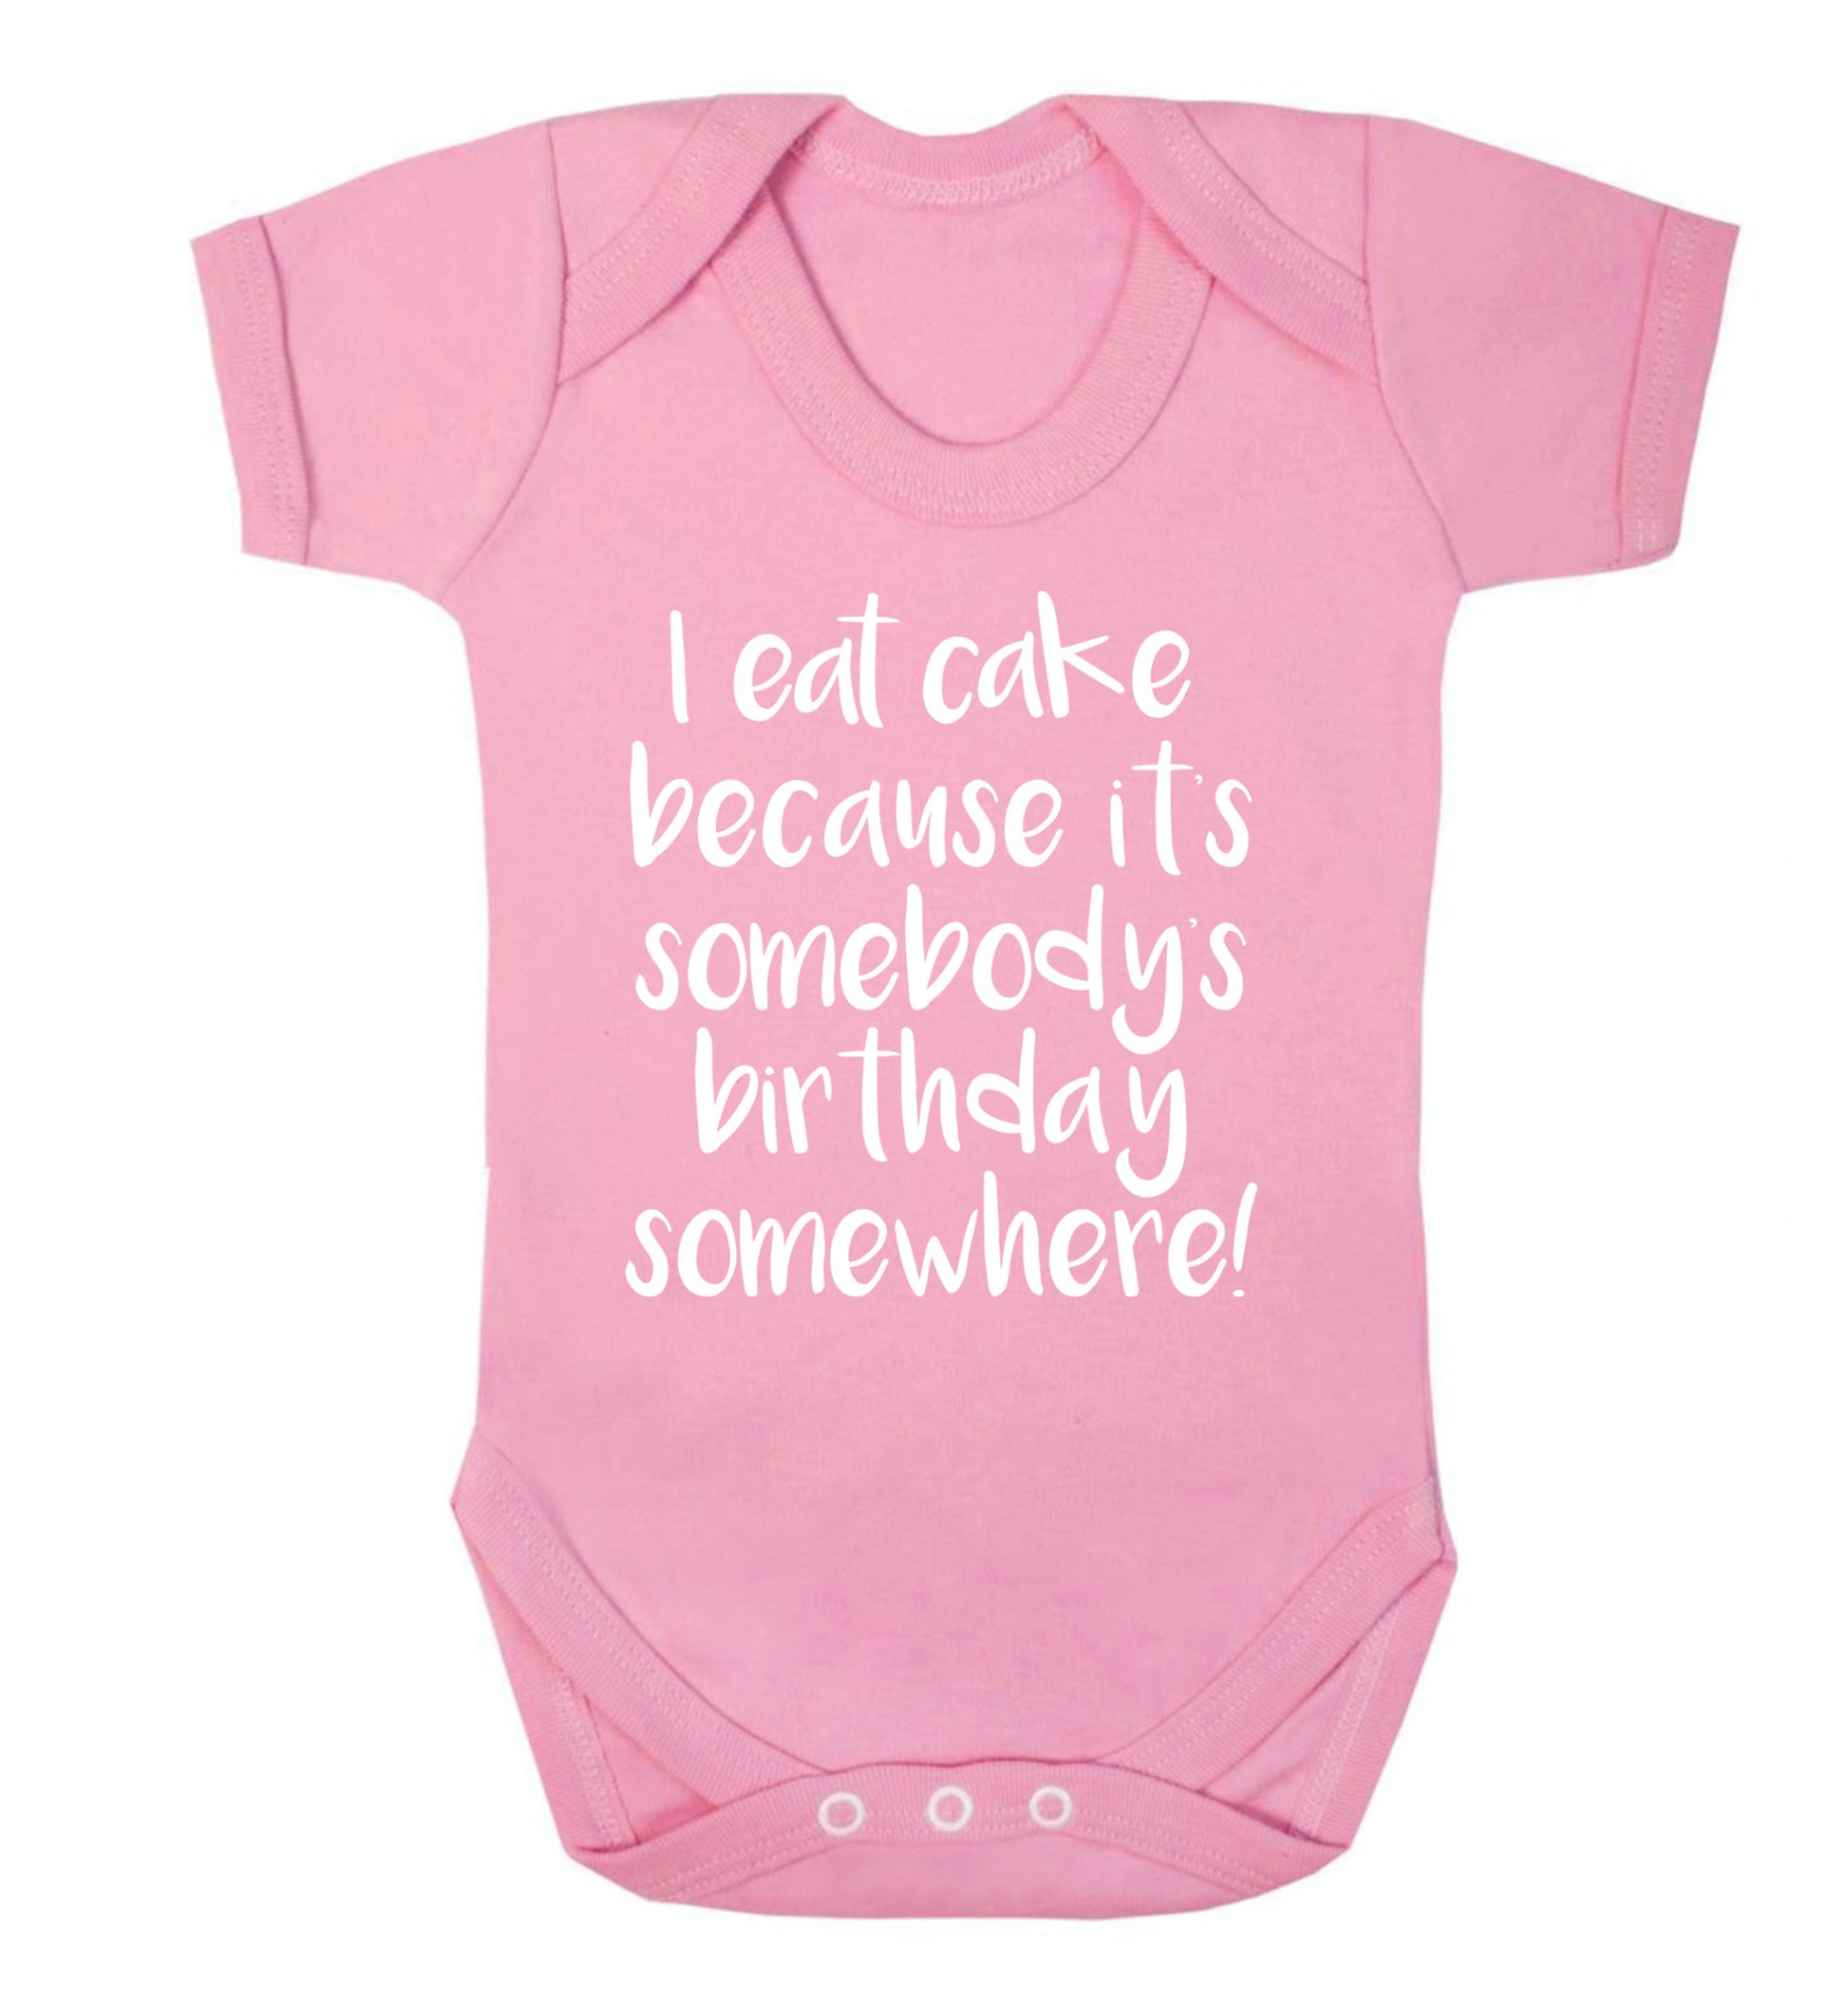 I eat cake because it's somebody's birthday somewhere! Baby Vest pale pink 18-24 months